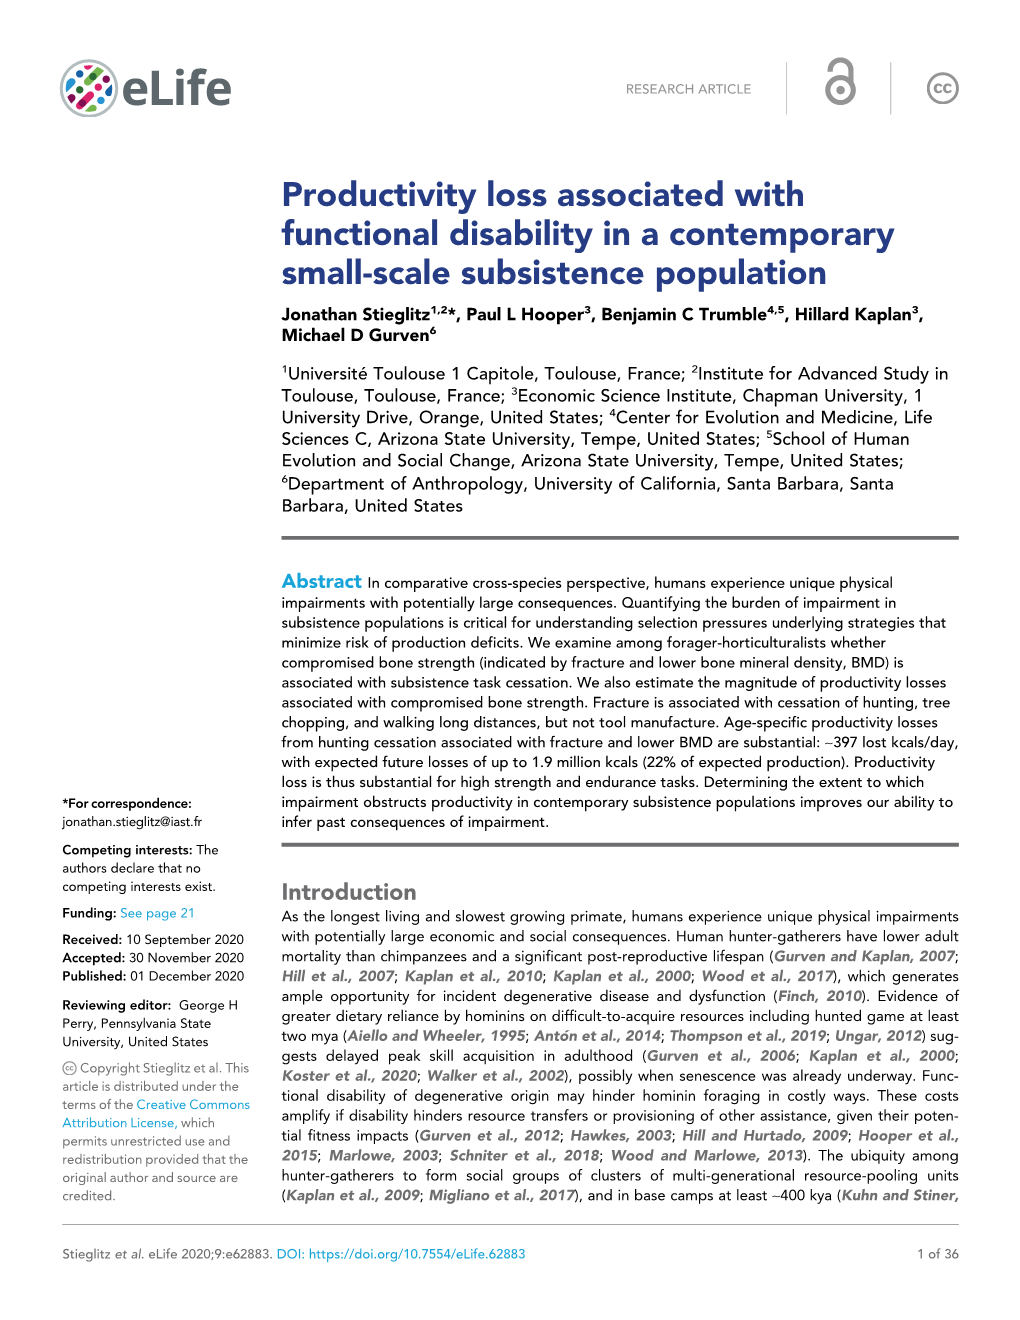 Productivity Loss Associated with Physical Disability in A